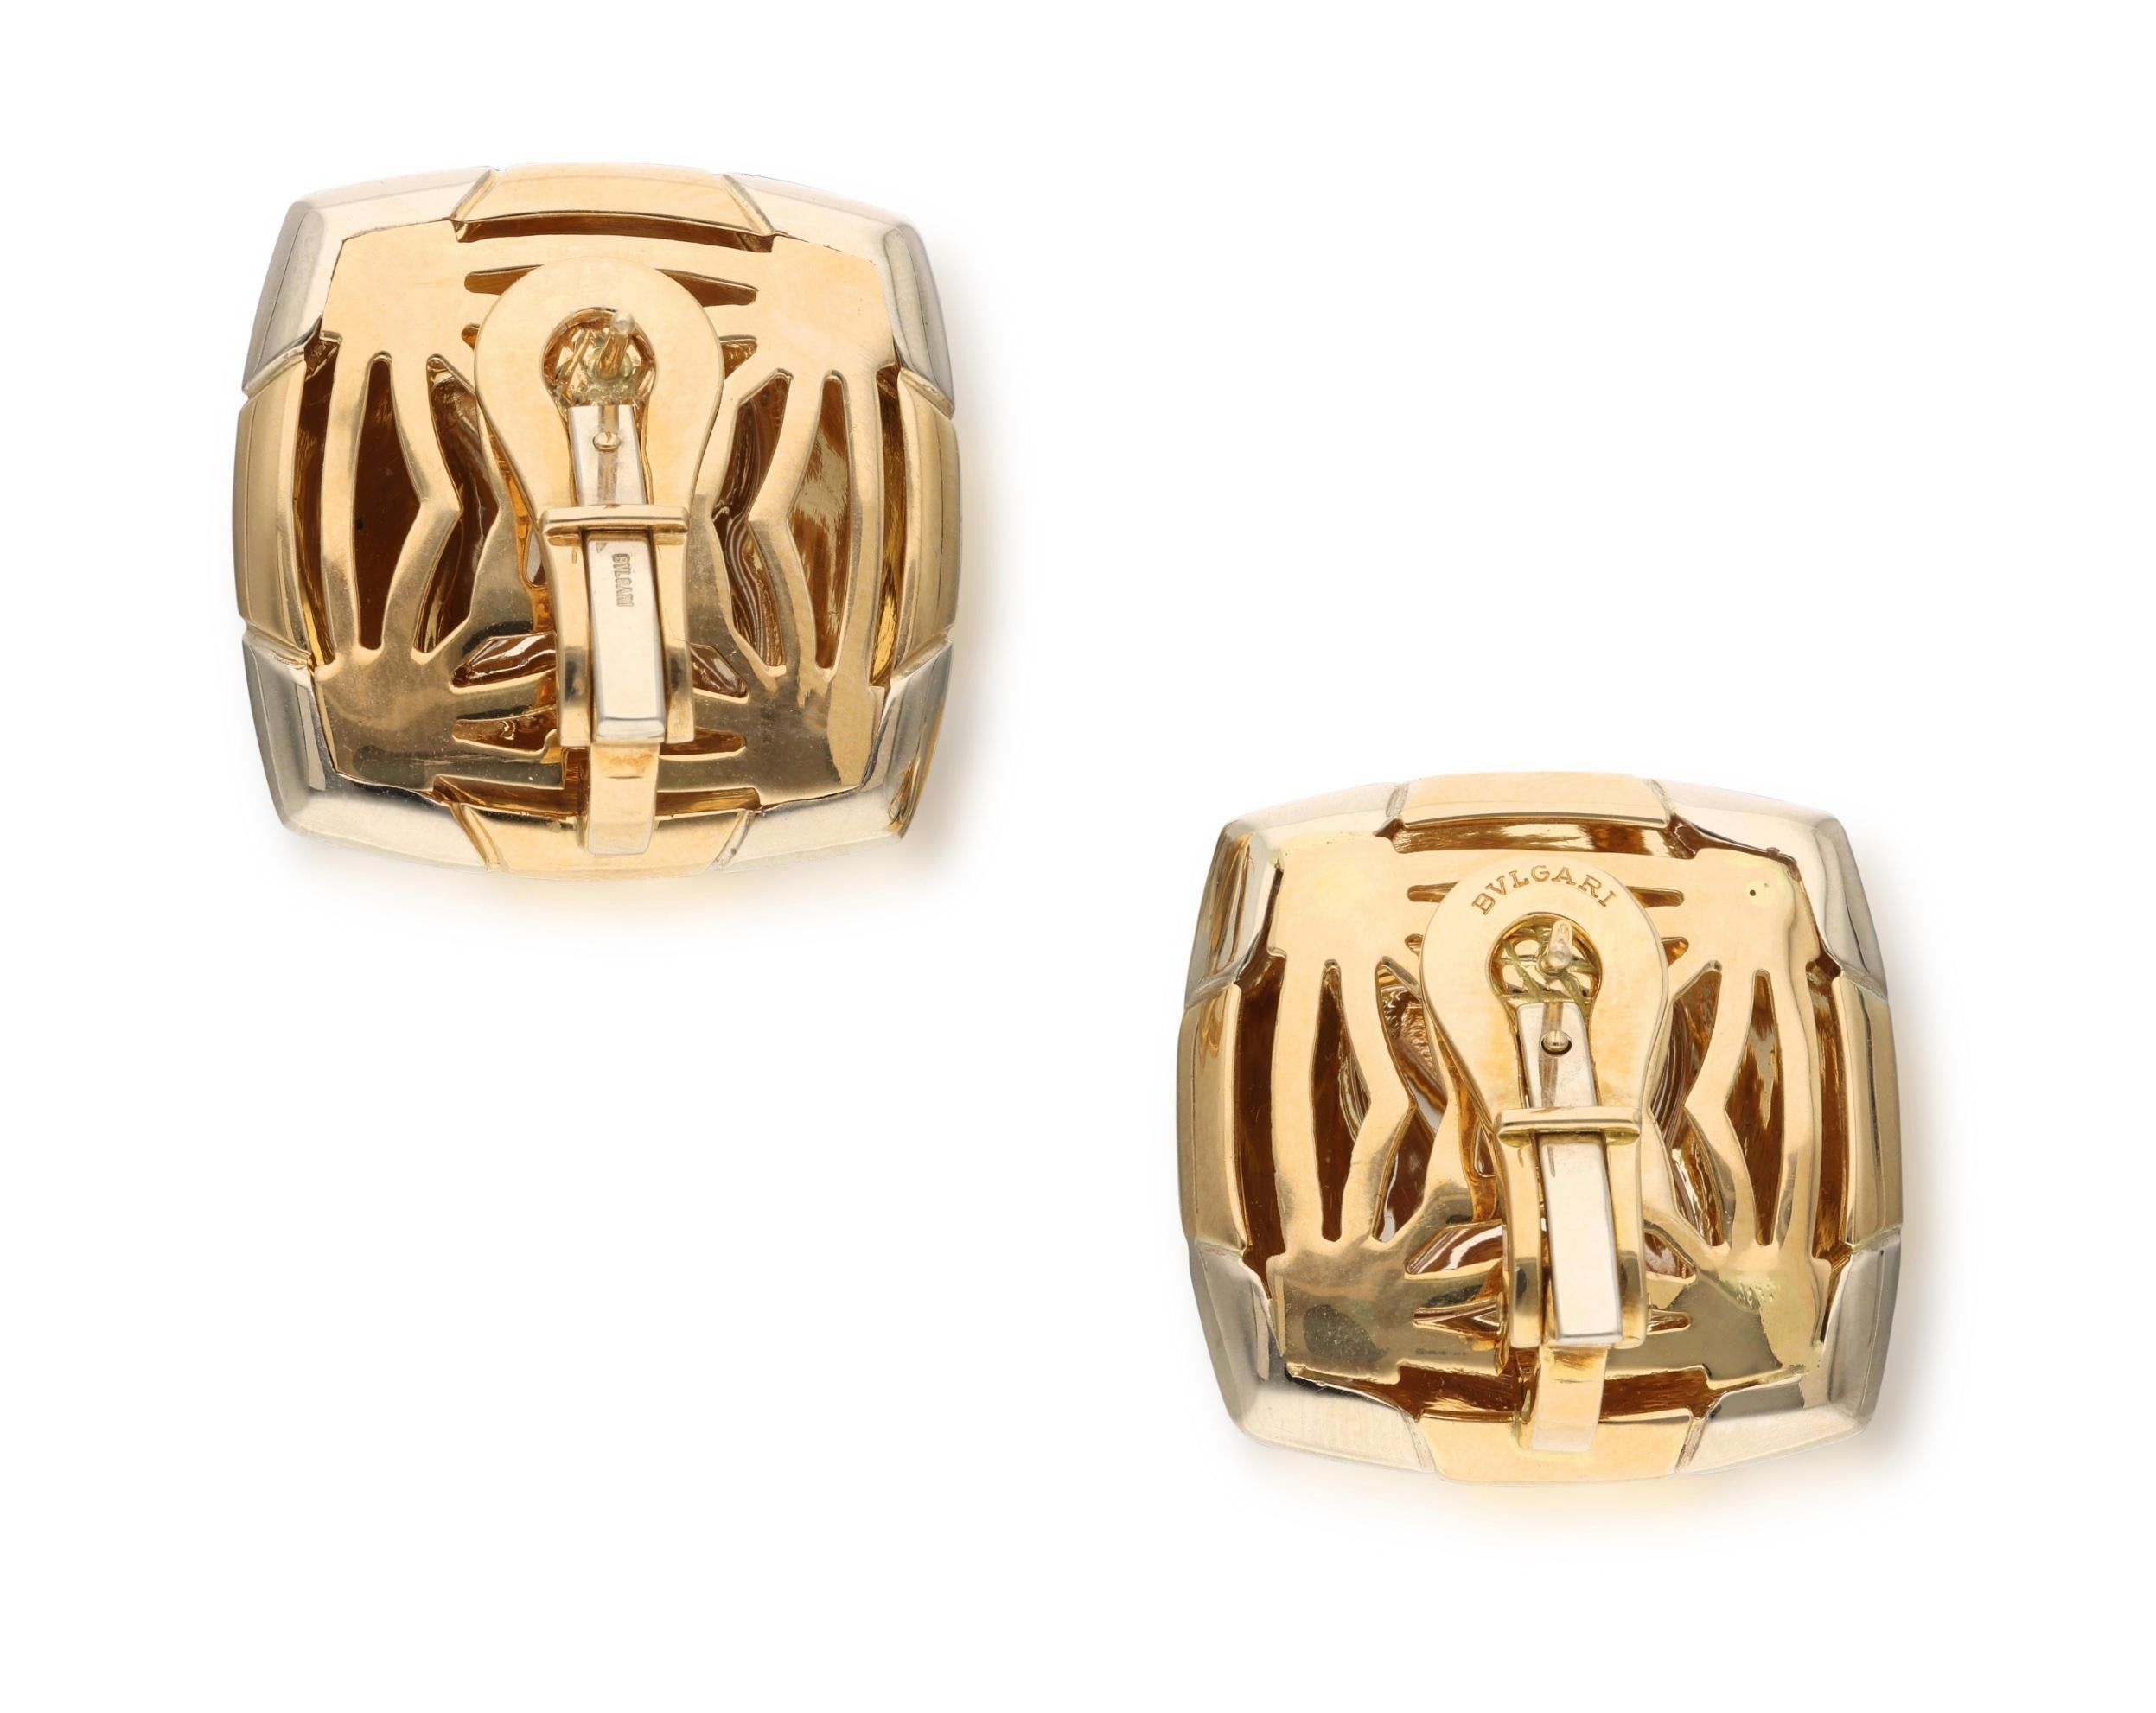 In the style of a pyramid, these ear clips are composed of two-tone gold.

- Signed Bvlgari
- Italy
- 18 karat yellow and white gold
- Total weight 24.65 grams
- Length 1 inch and width 1 inch
- Fitted with posts

The condition report is Very Good. 